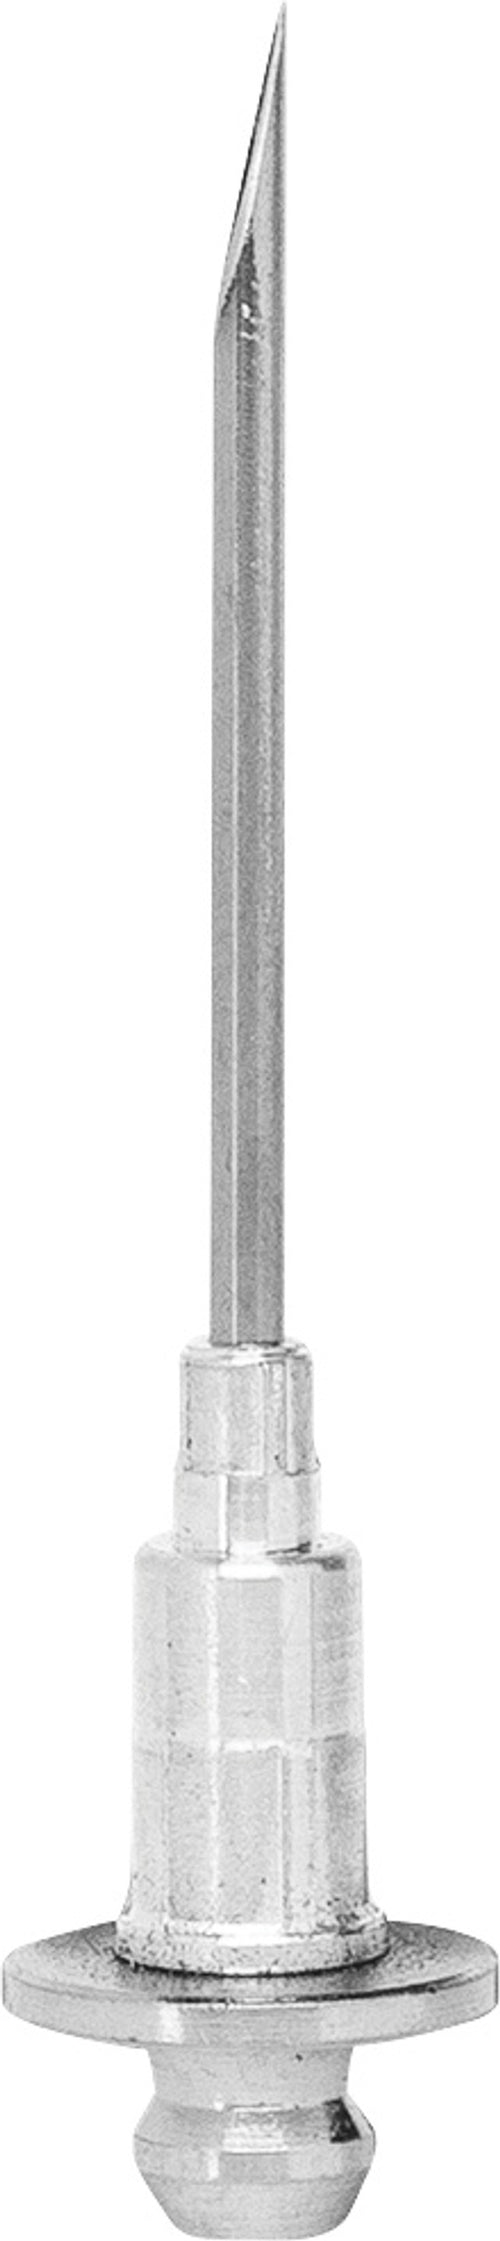 Legacy Manufacturing L2100-1 Workforce® Hypodermic Needle-Point Grease Coupler - MPR Tools & Equipment